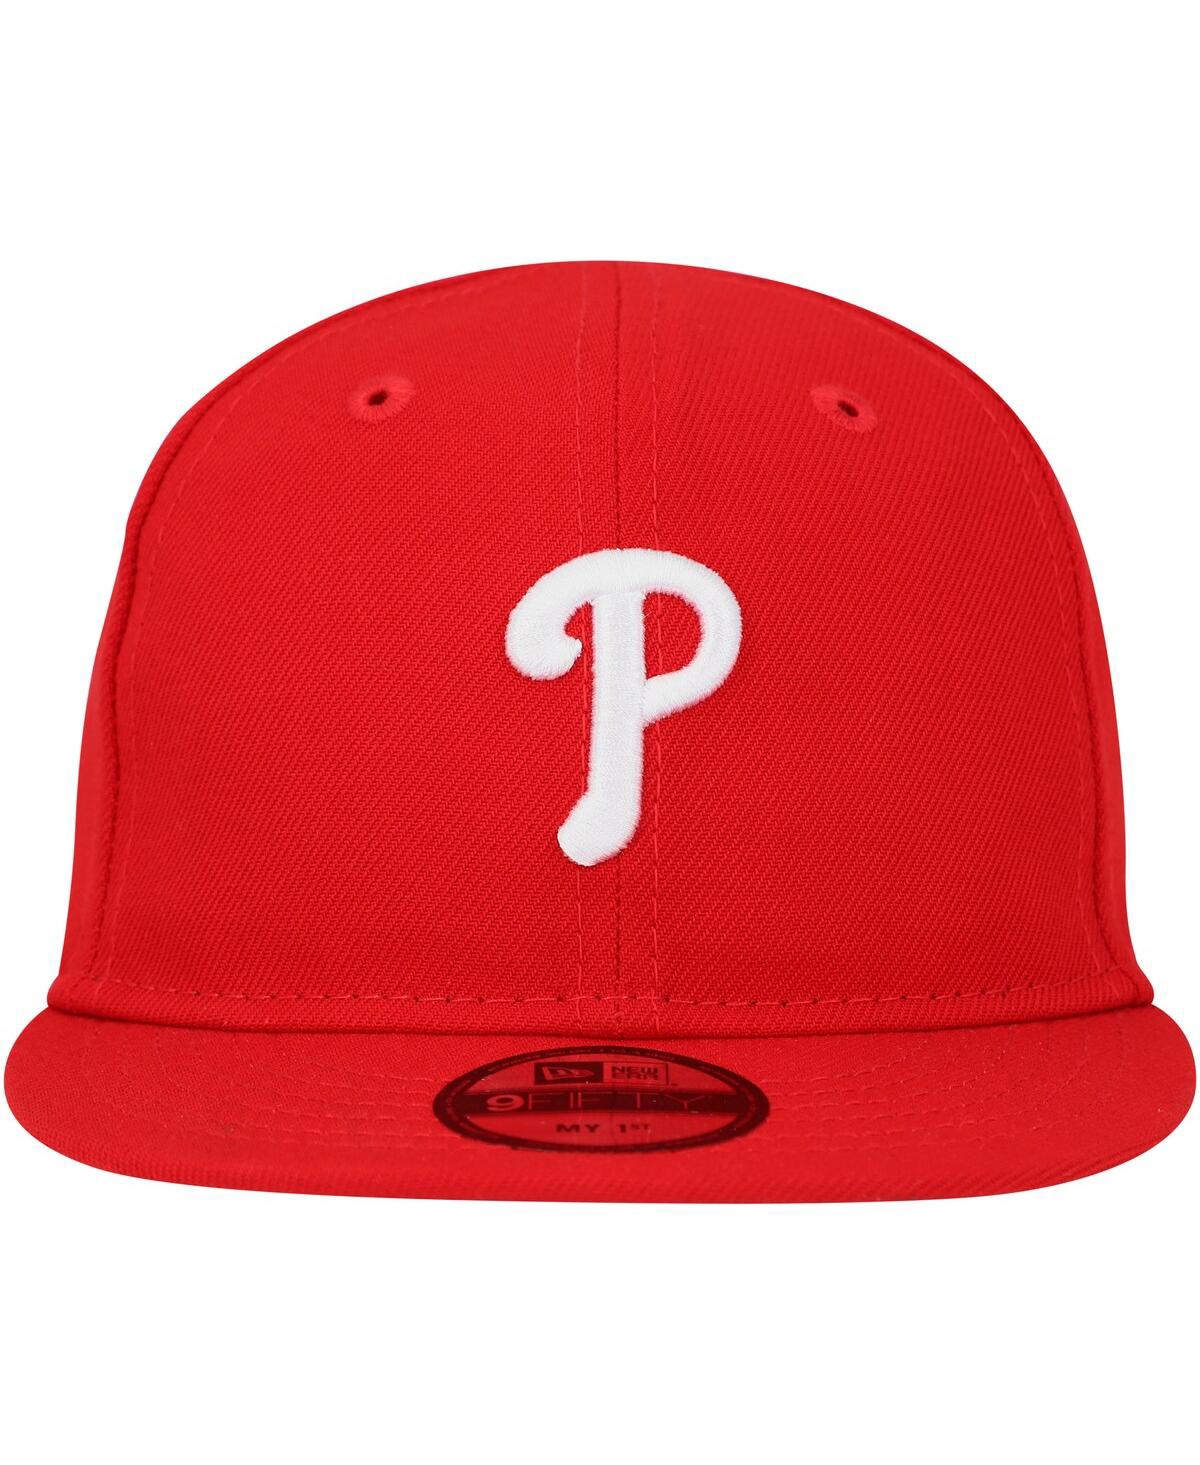 Shop New Era Infant Boys And Girls  Red Philadelphia Phillies My First 9fifty Adjustable Hat